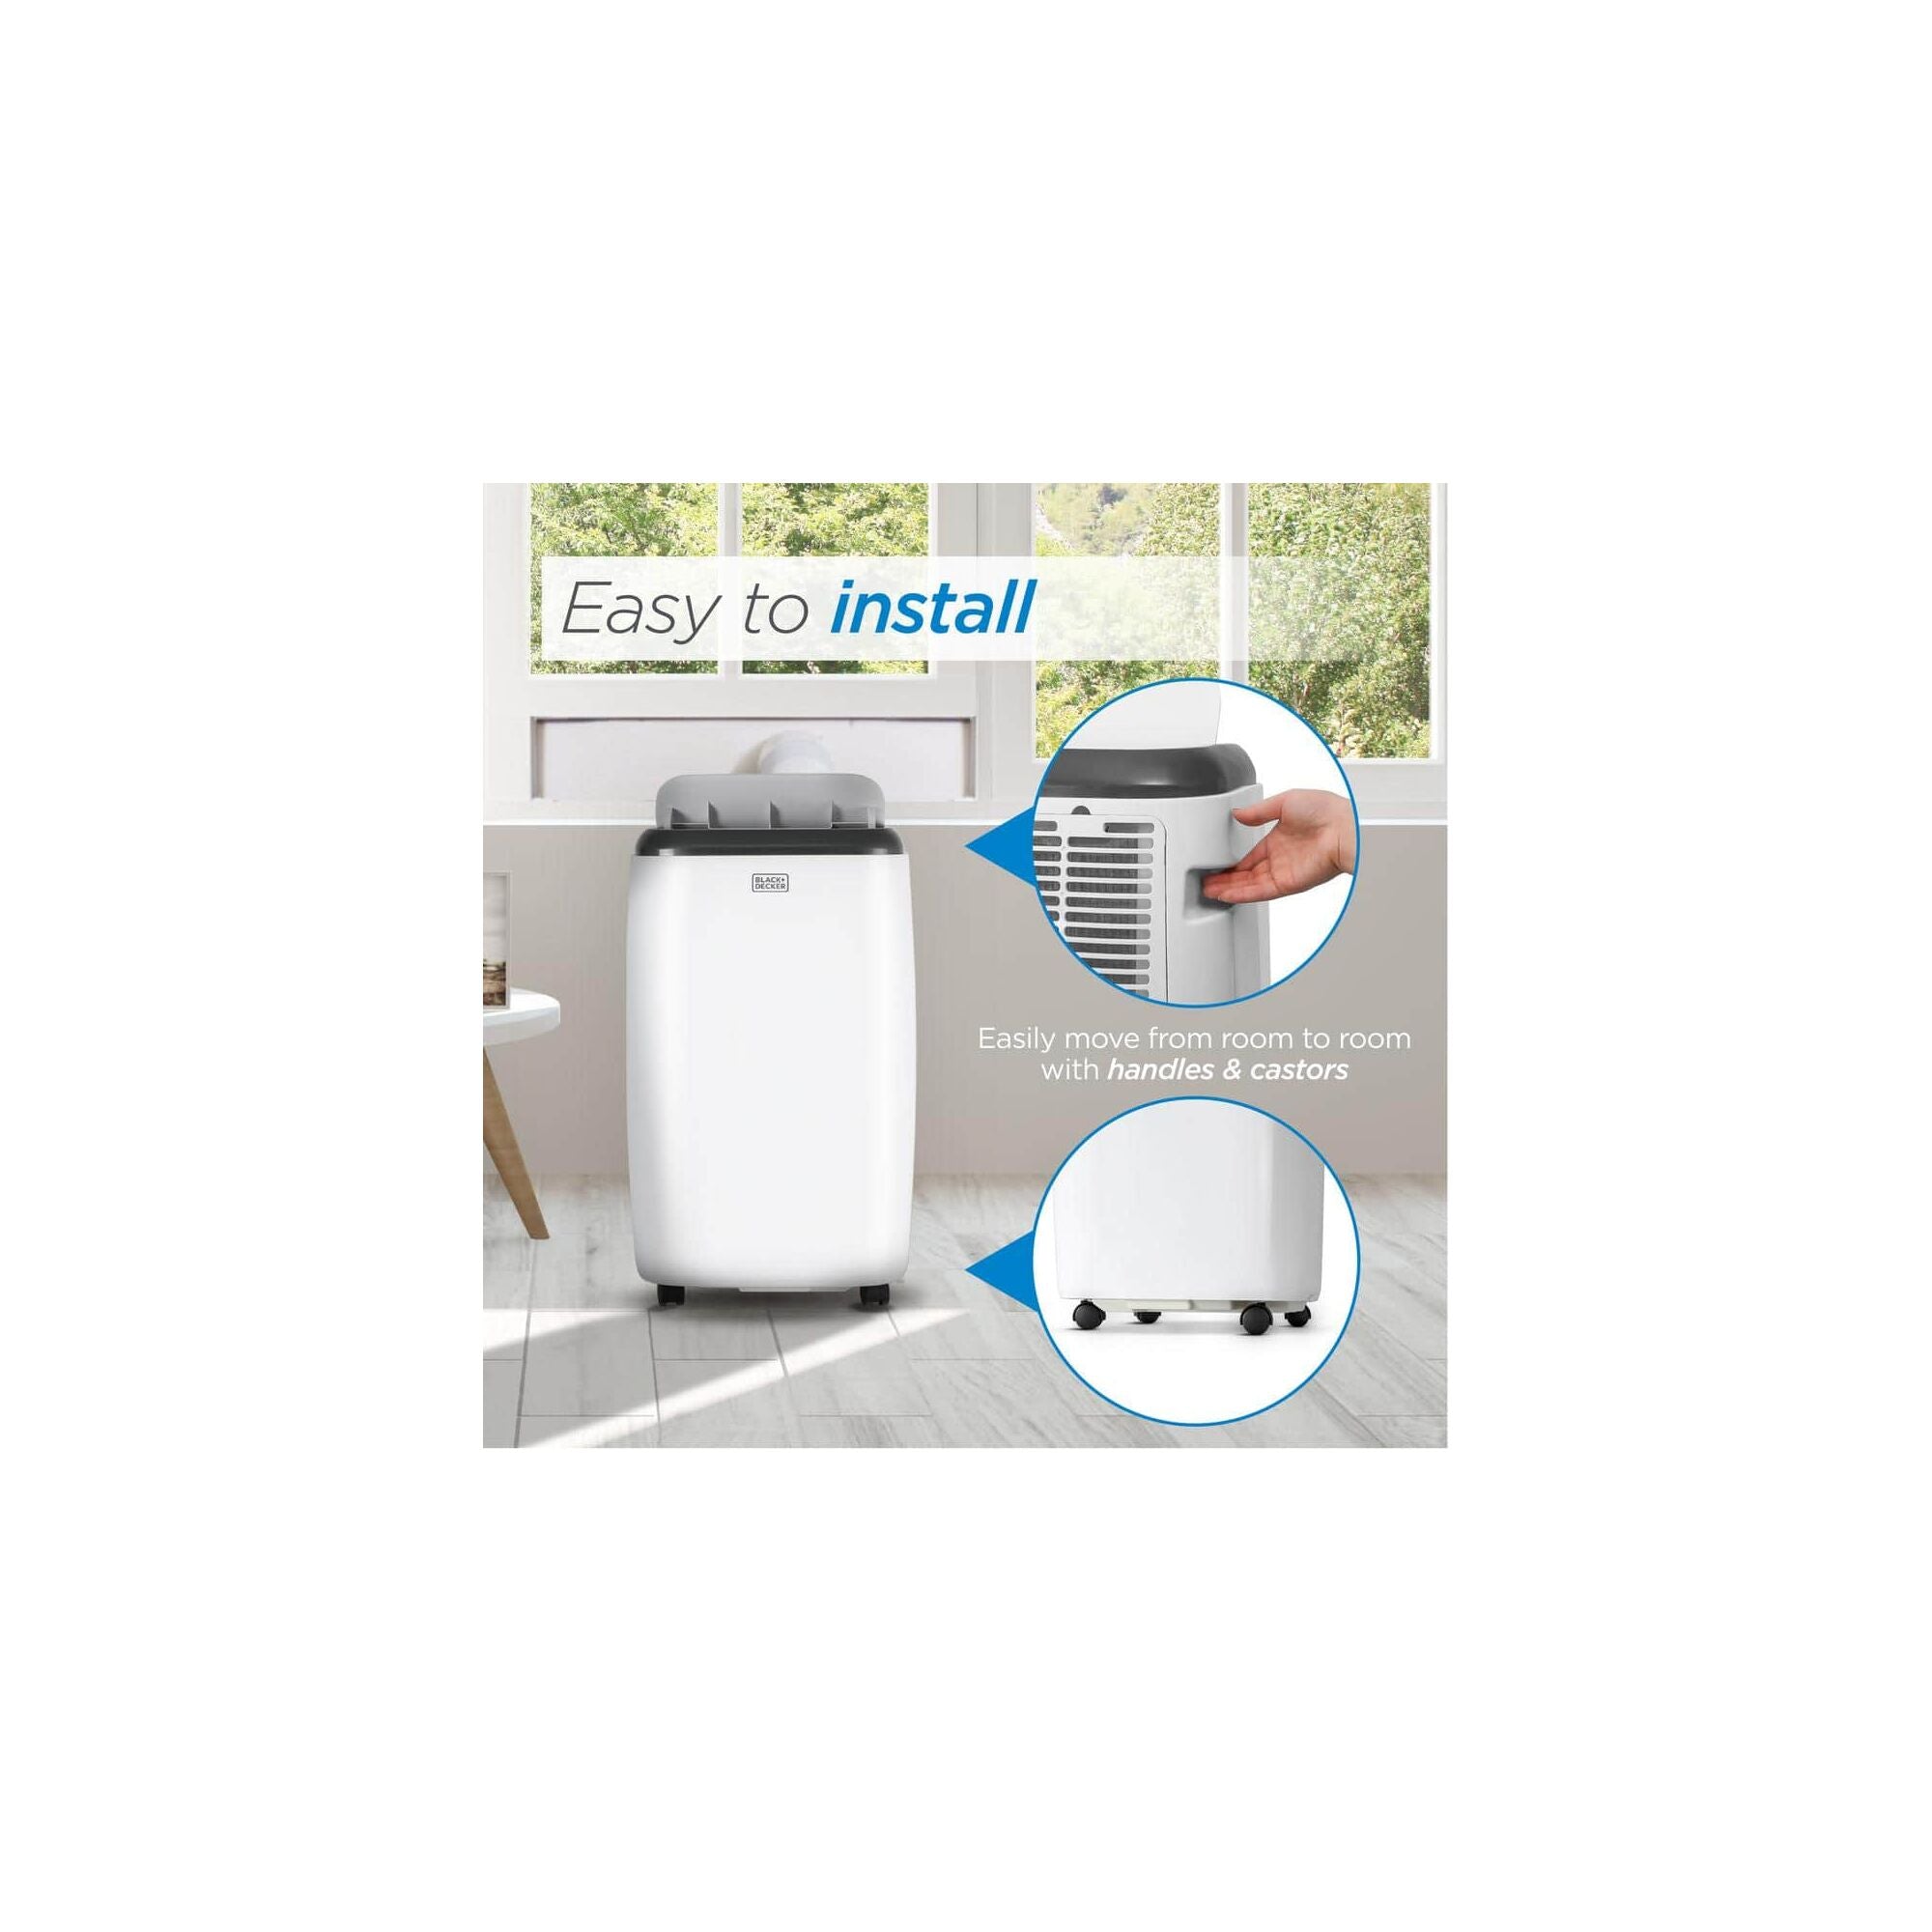 Black+decker Portable Air Conditioner With Follow Me Remote : Target